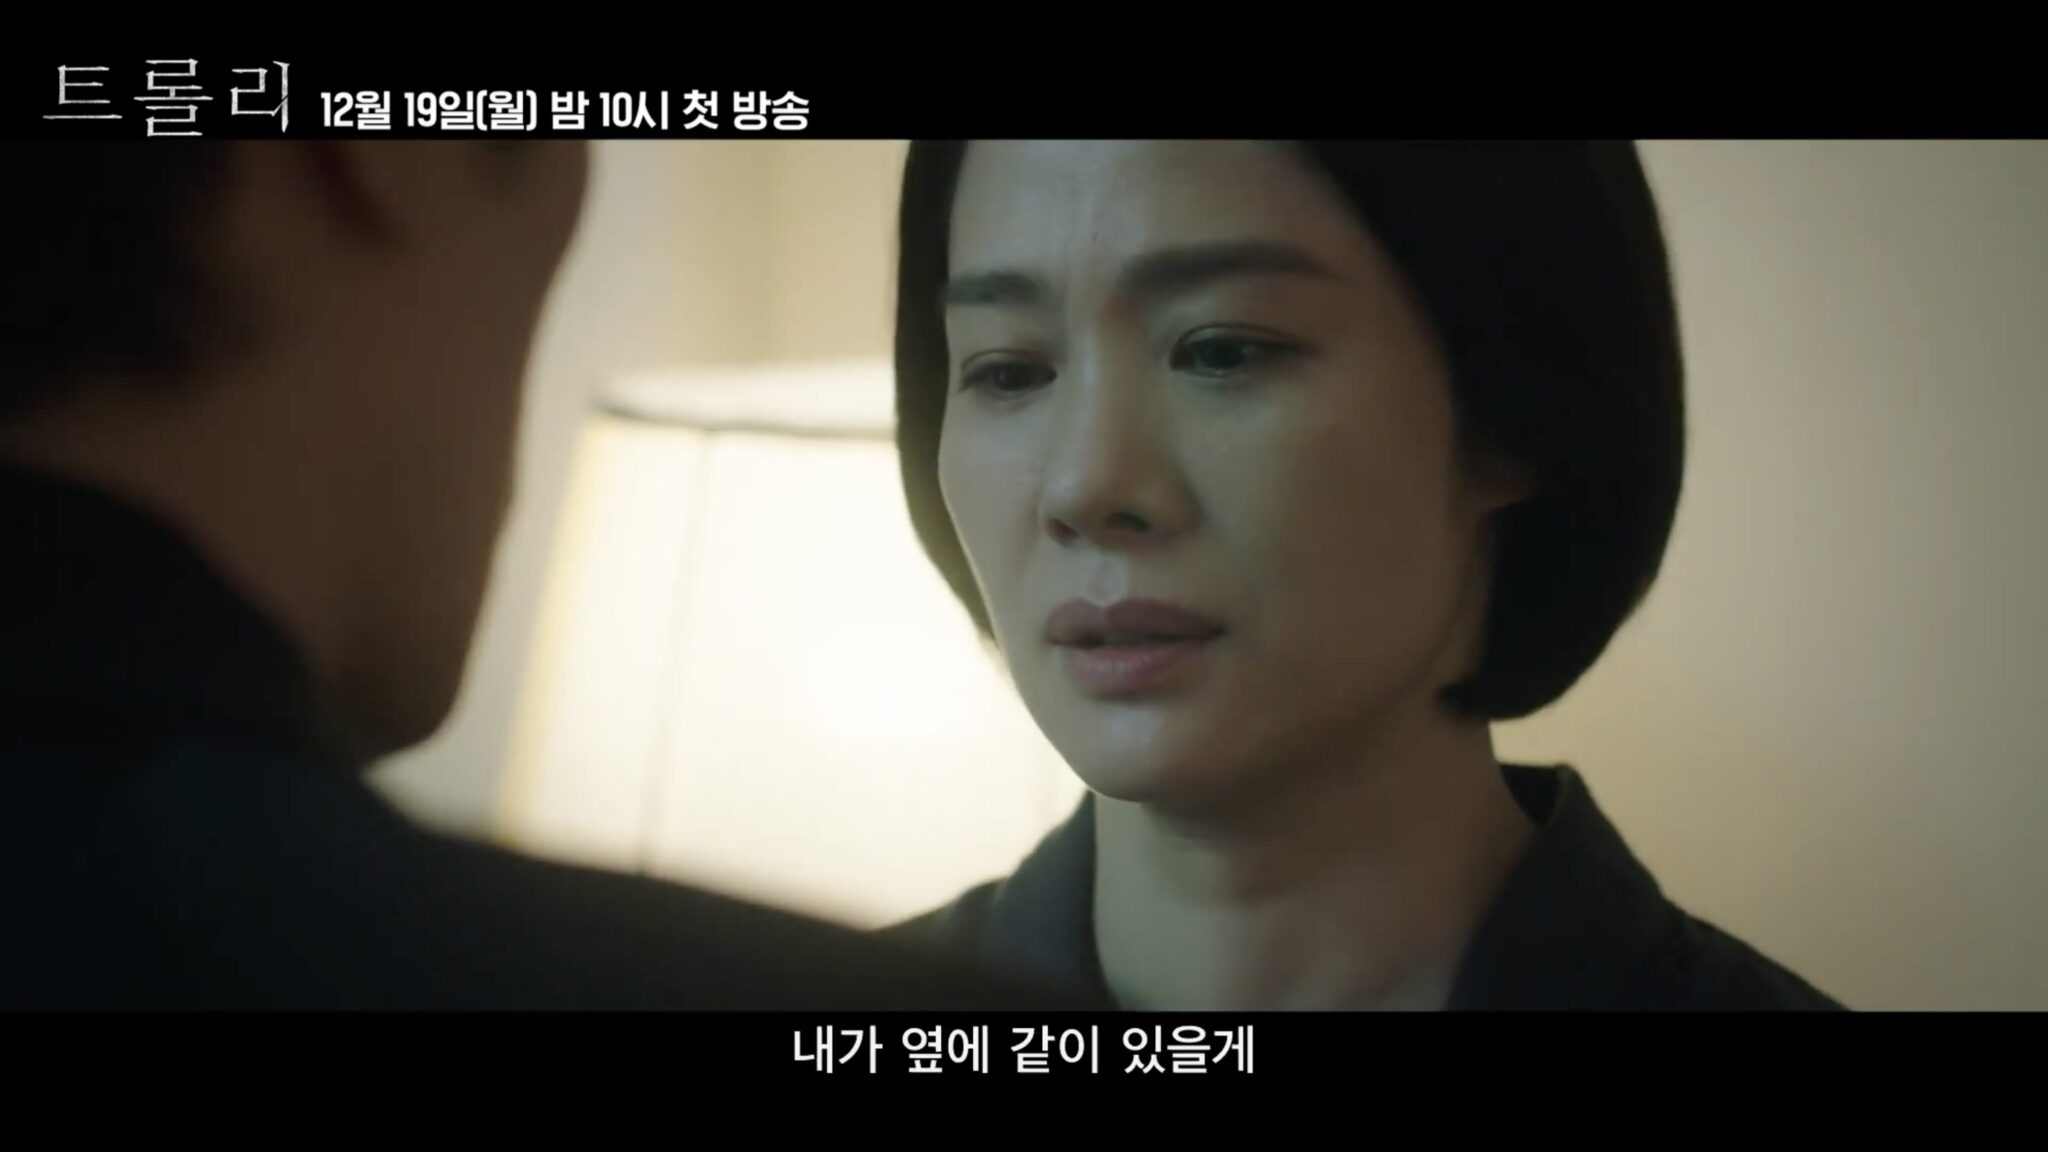 Kim Hyun-joo confronts her past in latest Trolley teaser